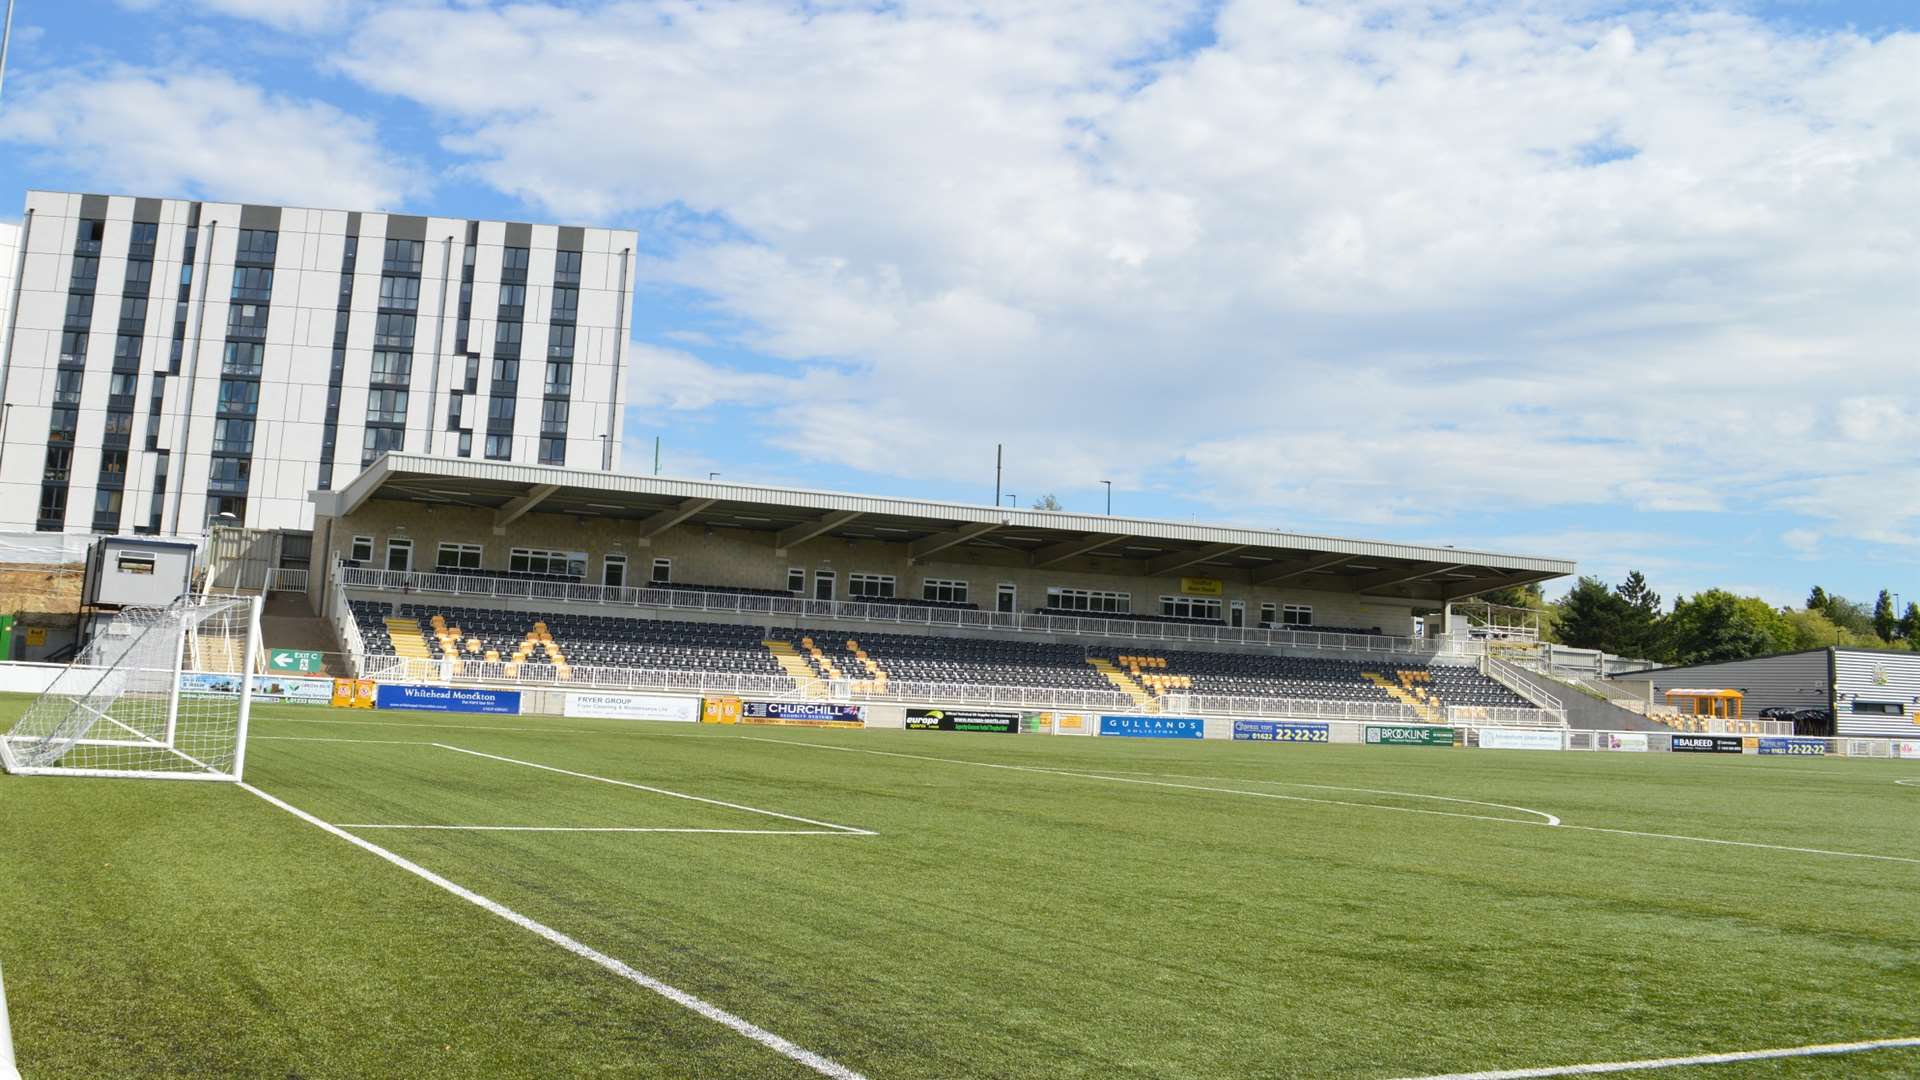 FM Conway were awarded a £550,000 contract to extend the east stand at Maidstone United